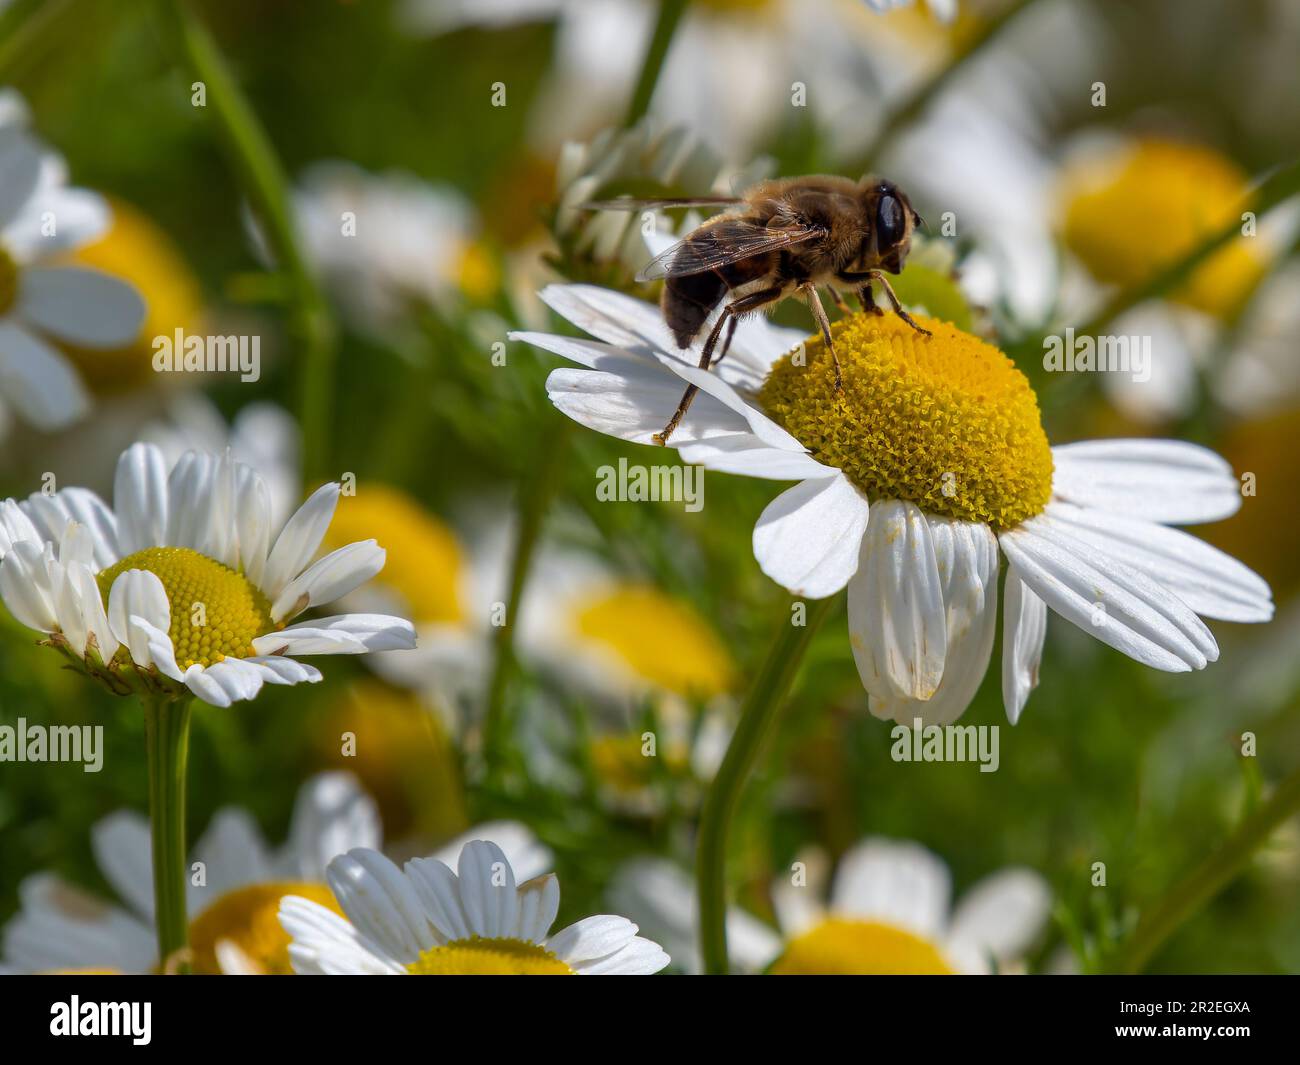 small bee collects pollen from a white chamomile flower on a summer day. Honeybee perched on white daisy flower, close-up. Stock Photo